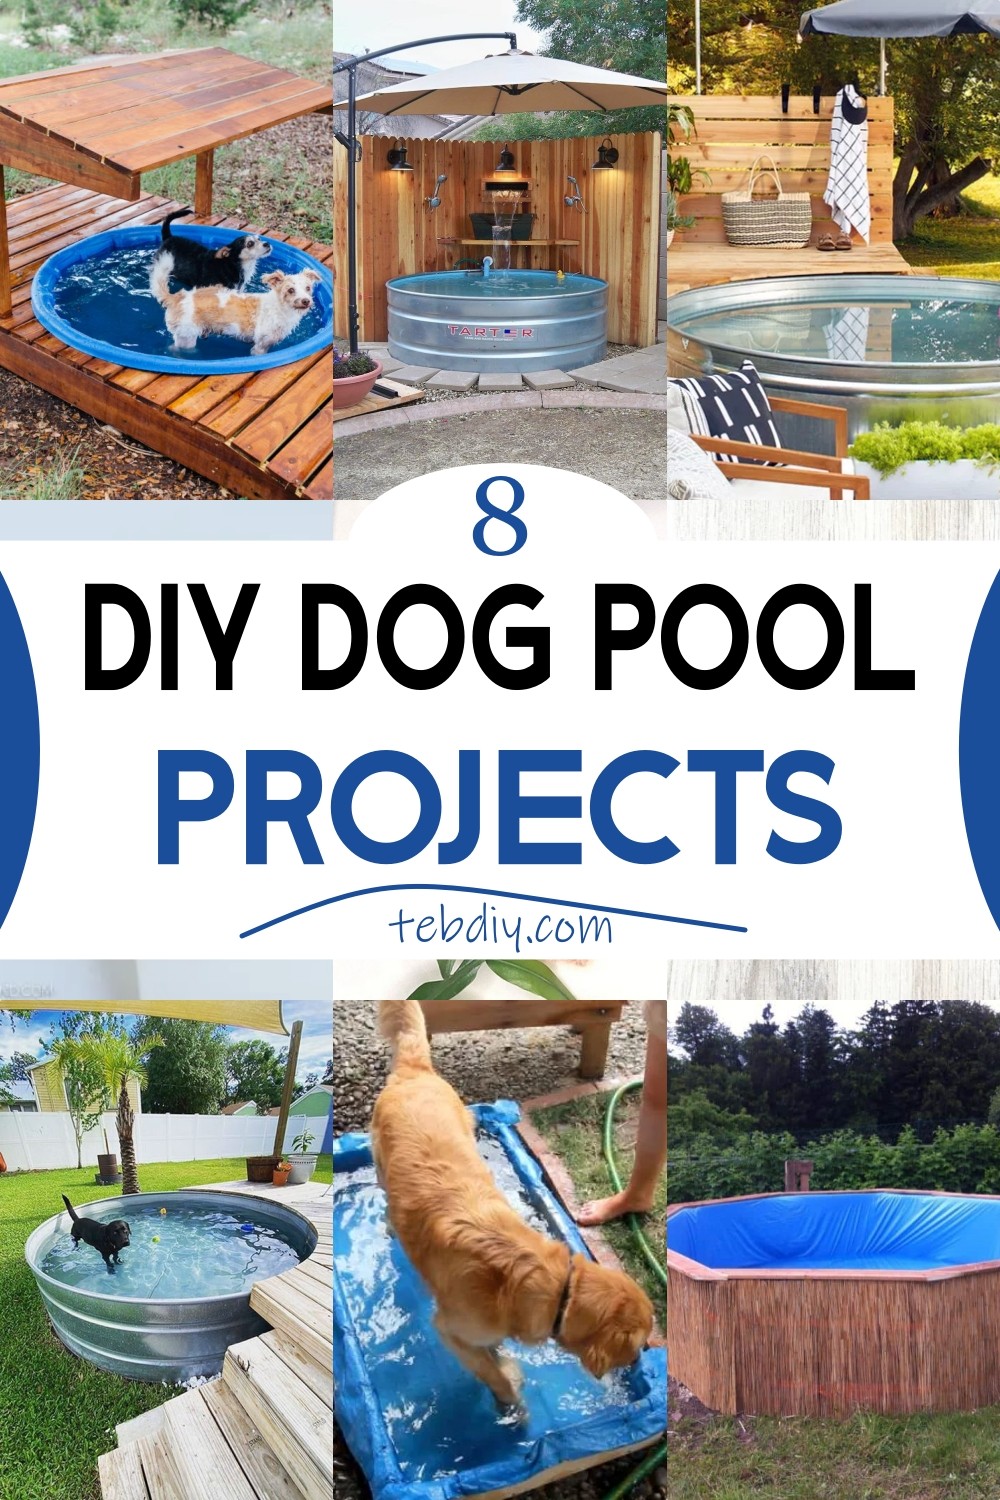 DIY Dog Pool Projects